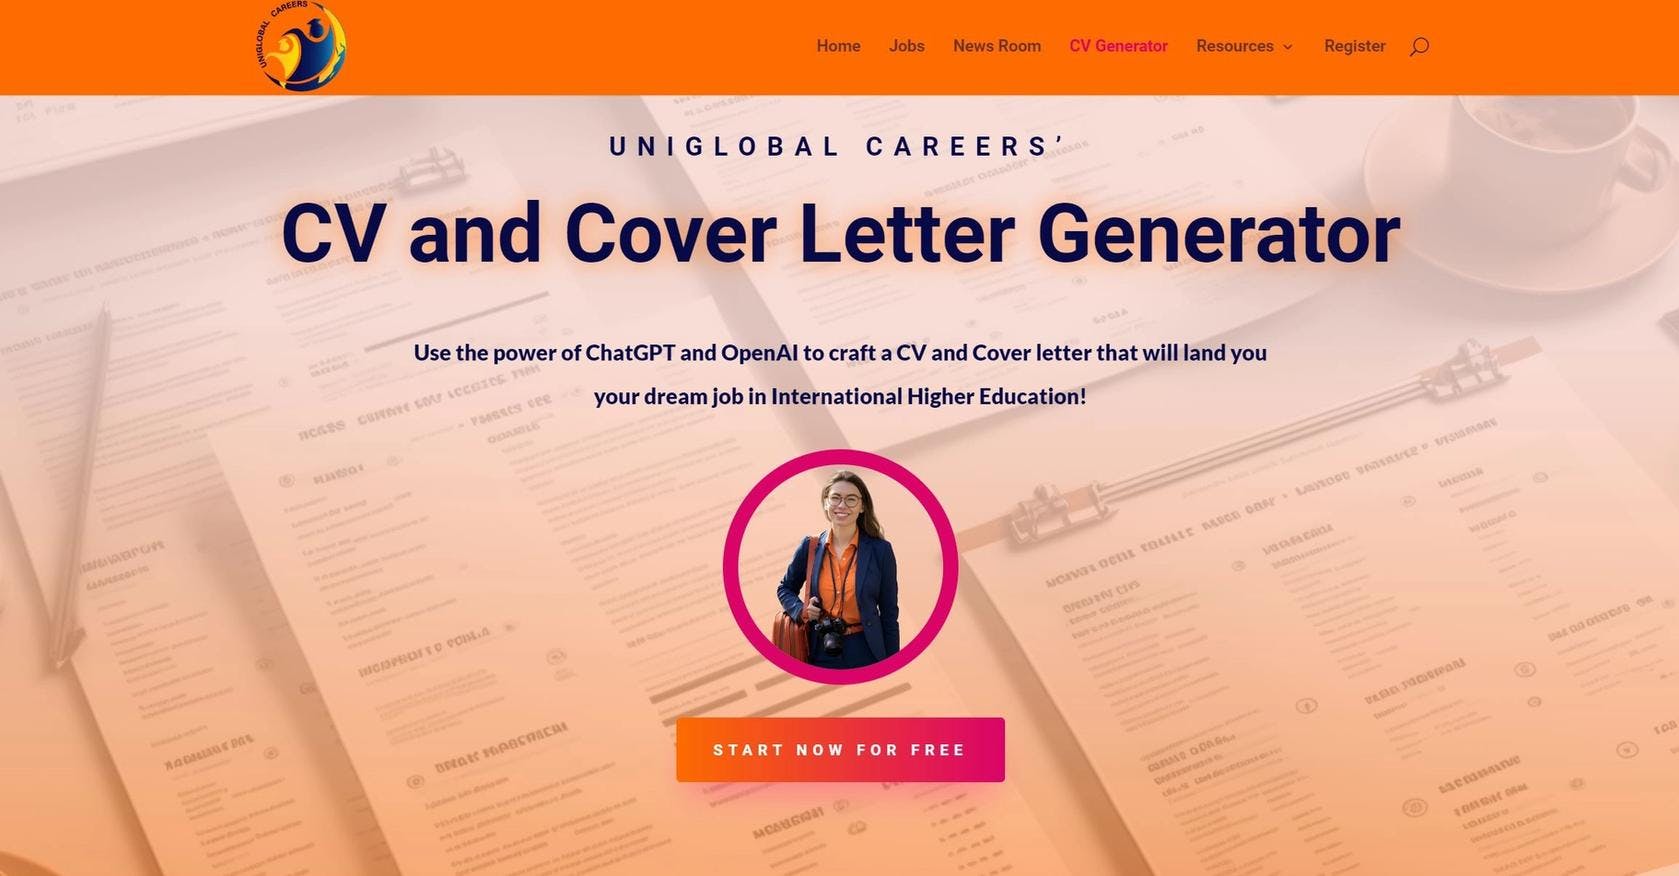 UniGlobal CV and Cover Letter Generator